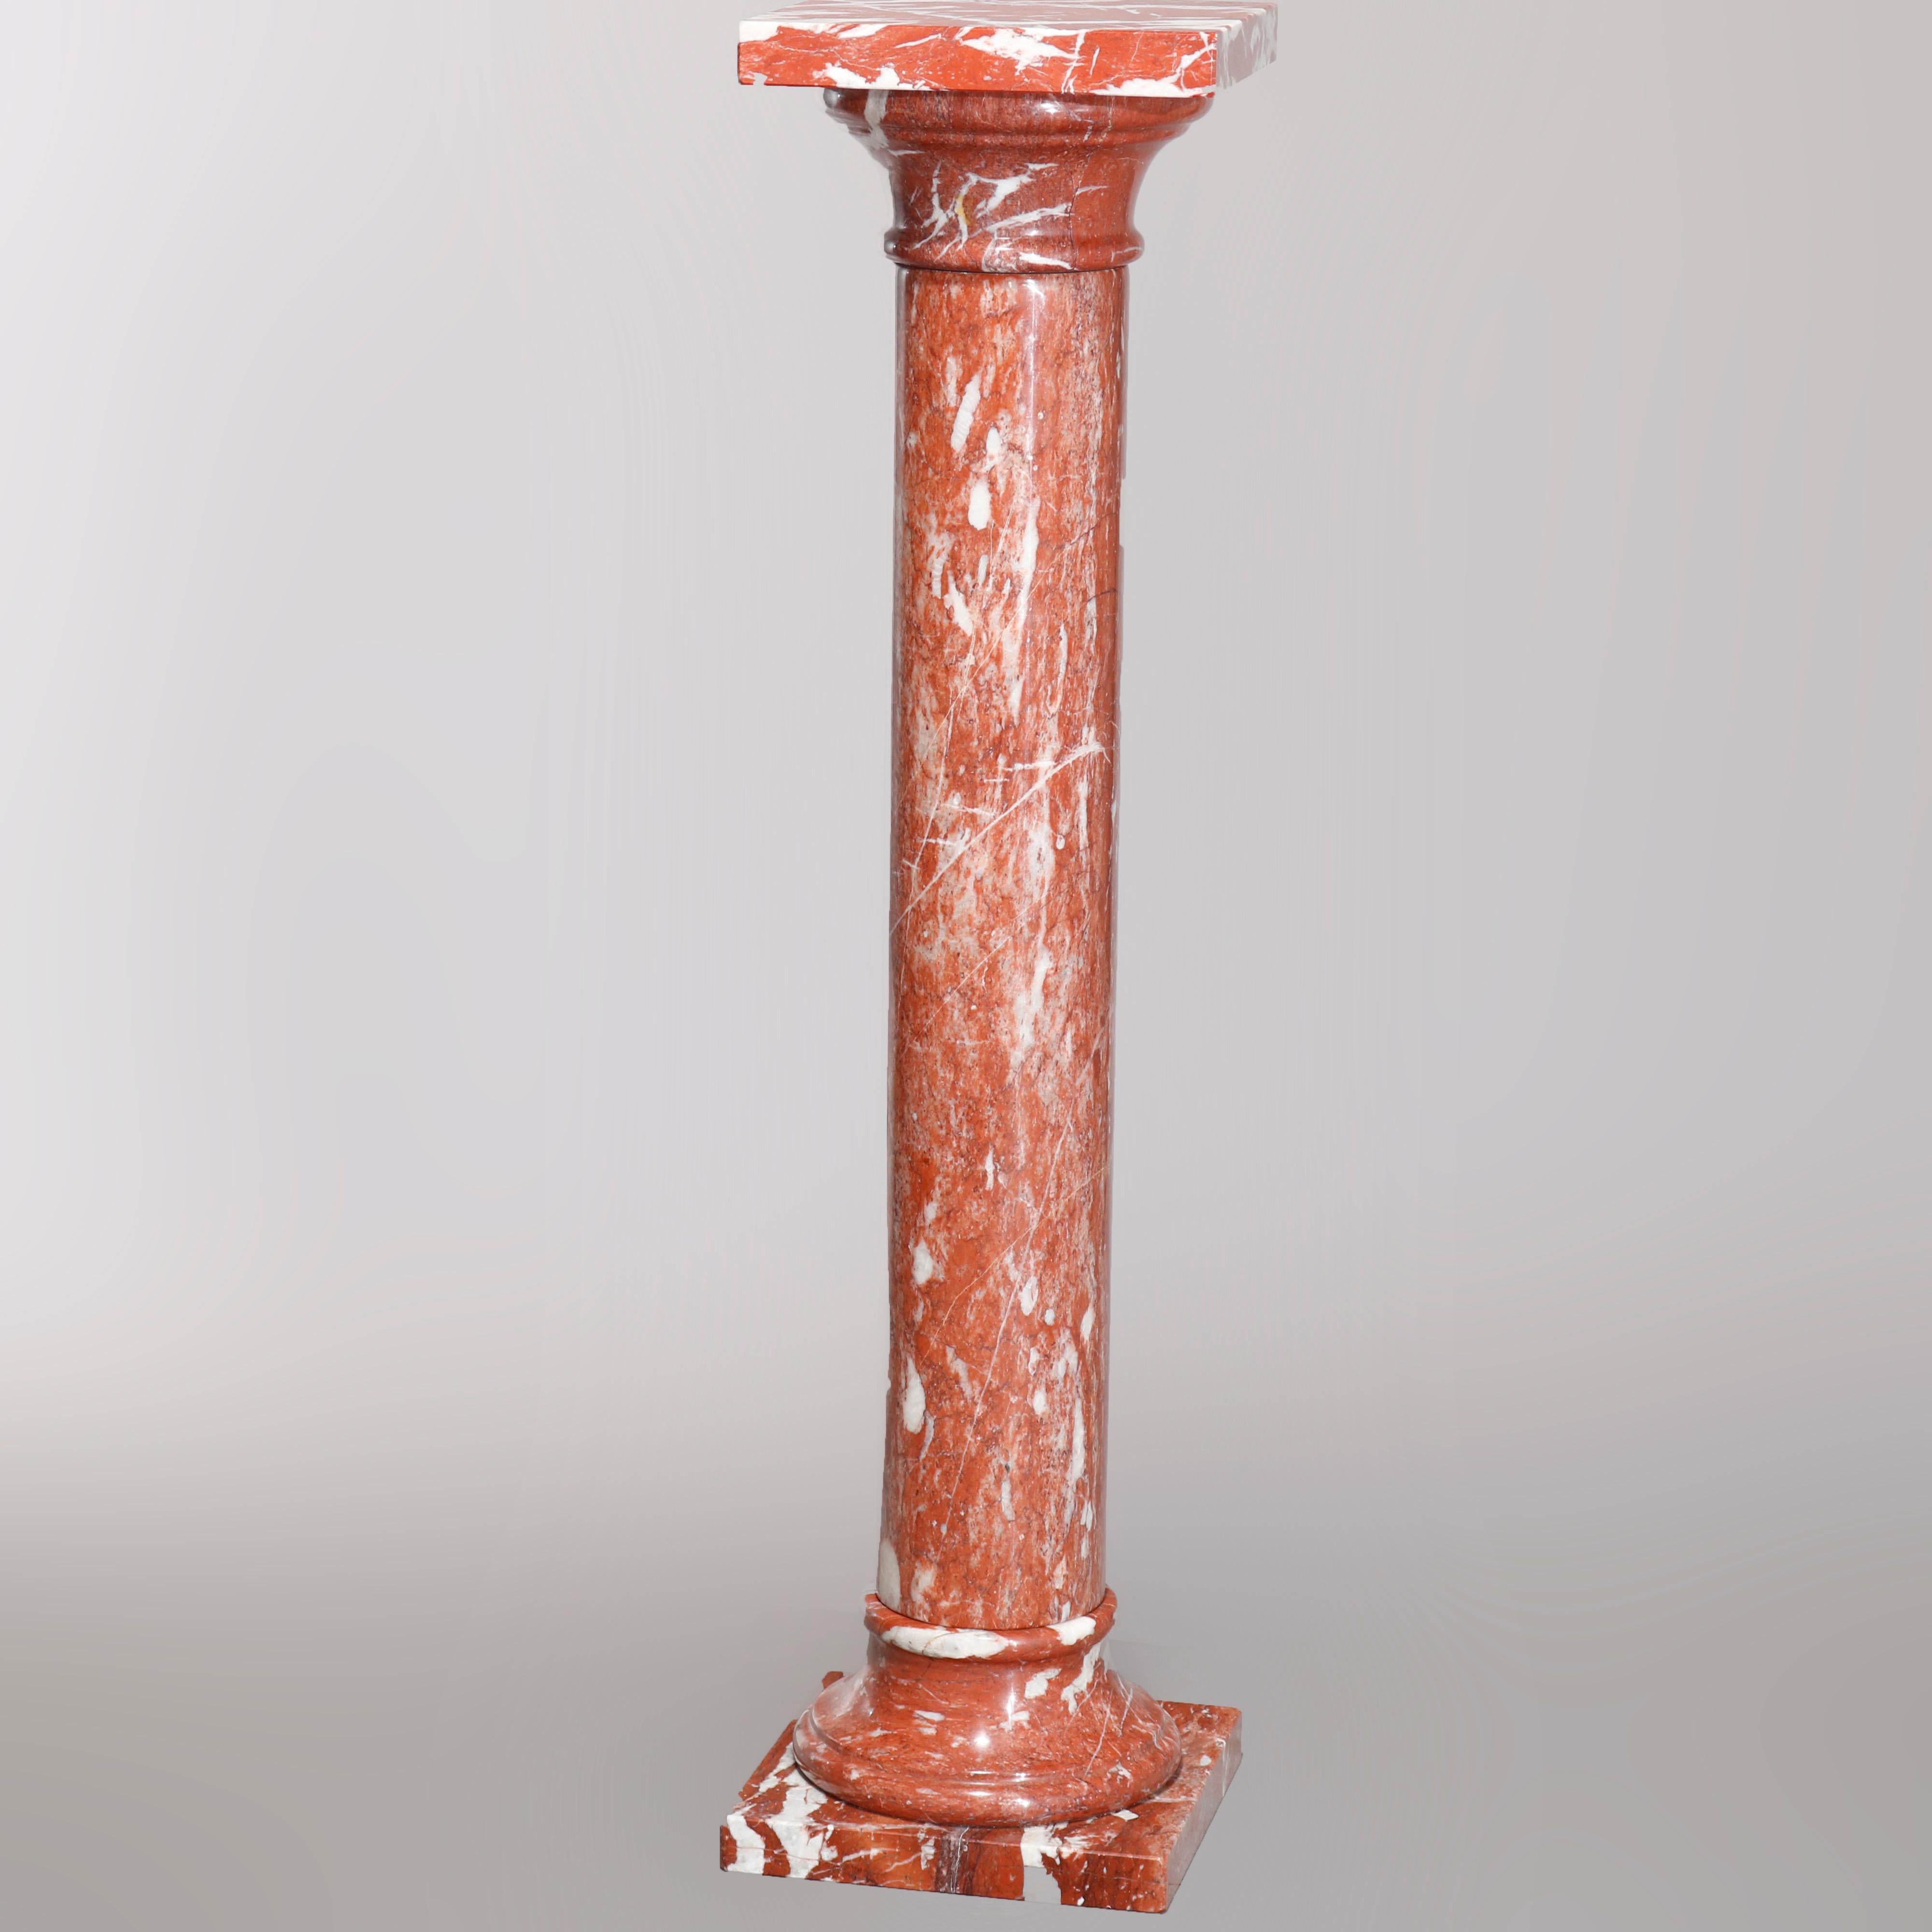 A vintage Classical sculpture display pedestal offers deeply veined rouge marble construction in Greek Doric Column form, 20th century.

Measures: 40.5